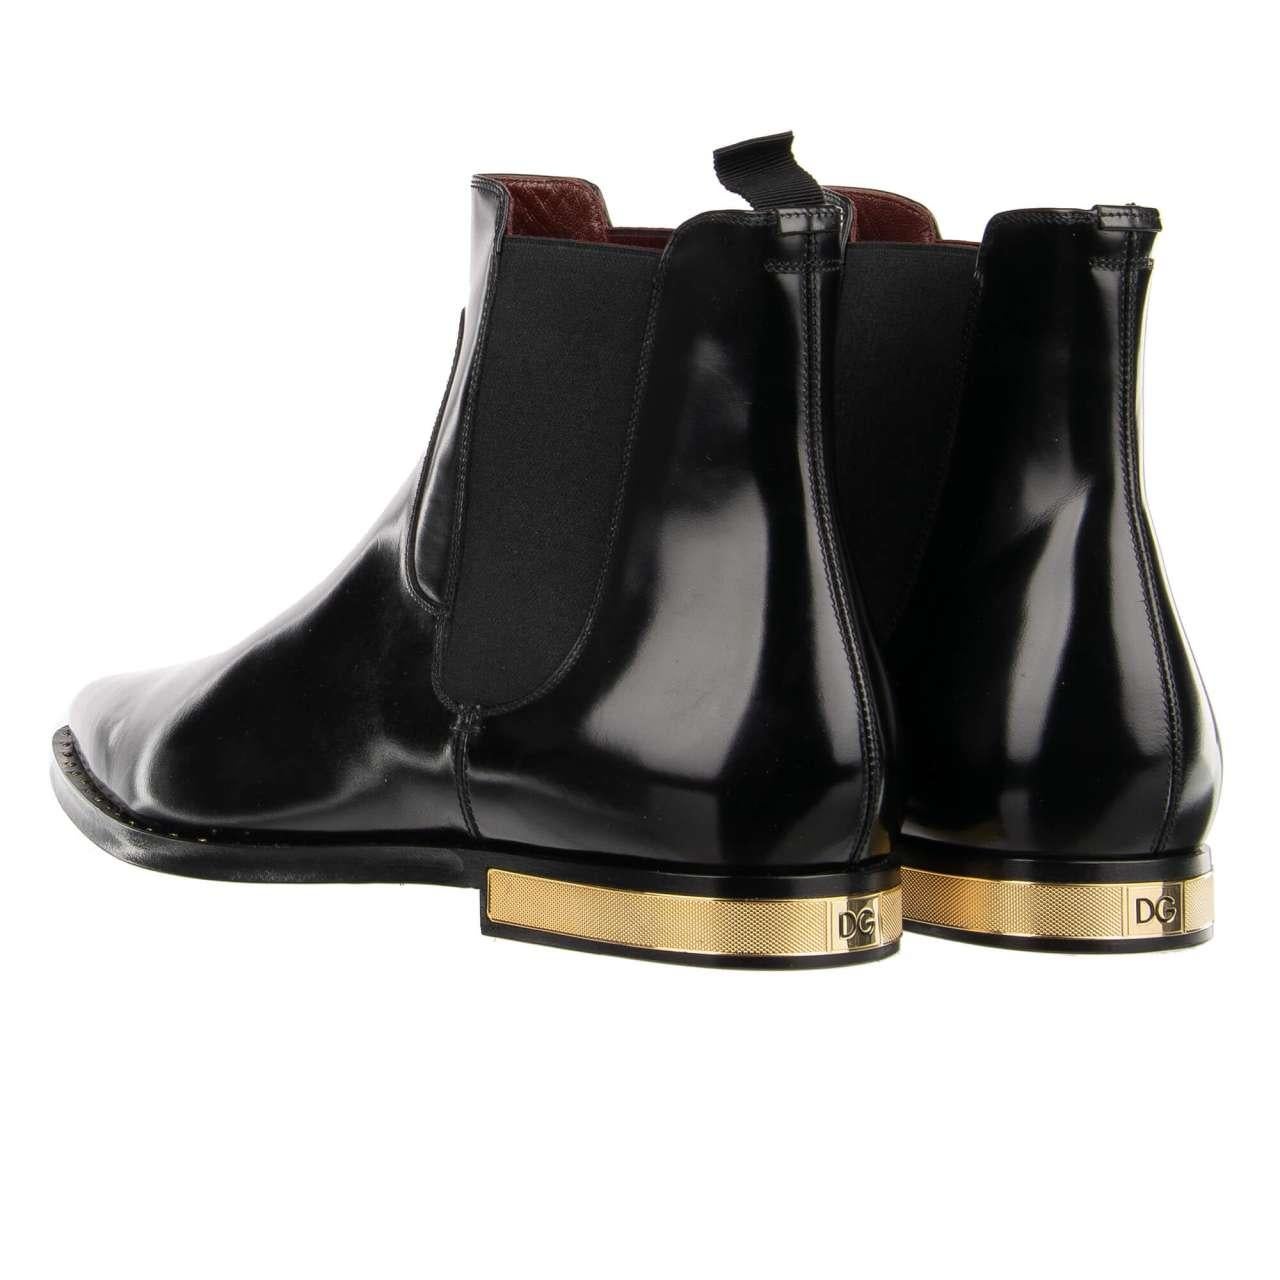 - Pointy Ankle Boots Shoes MILLENIALS made of calfskin embellished with metal logo heel by DOLCE & GABBANA - MADE IN ITALY - Former RRP: EUR 1.400 - New with Box - Model: A60218-A1203-80999 - Material: 60% Calfskin, 20% Viscose, 20% Cotton - Sole: